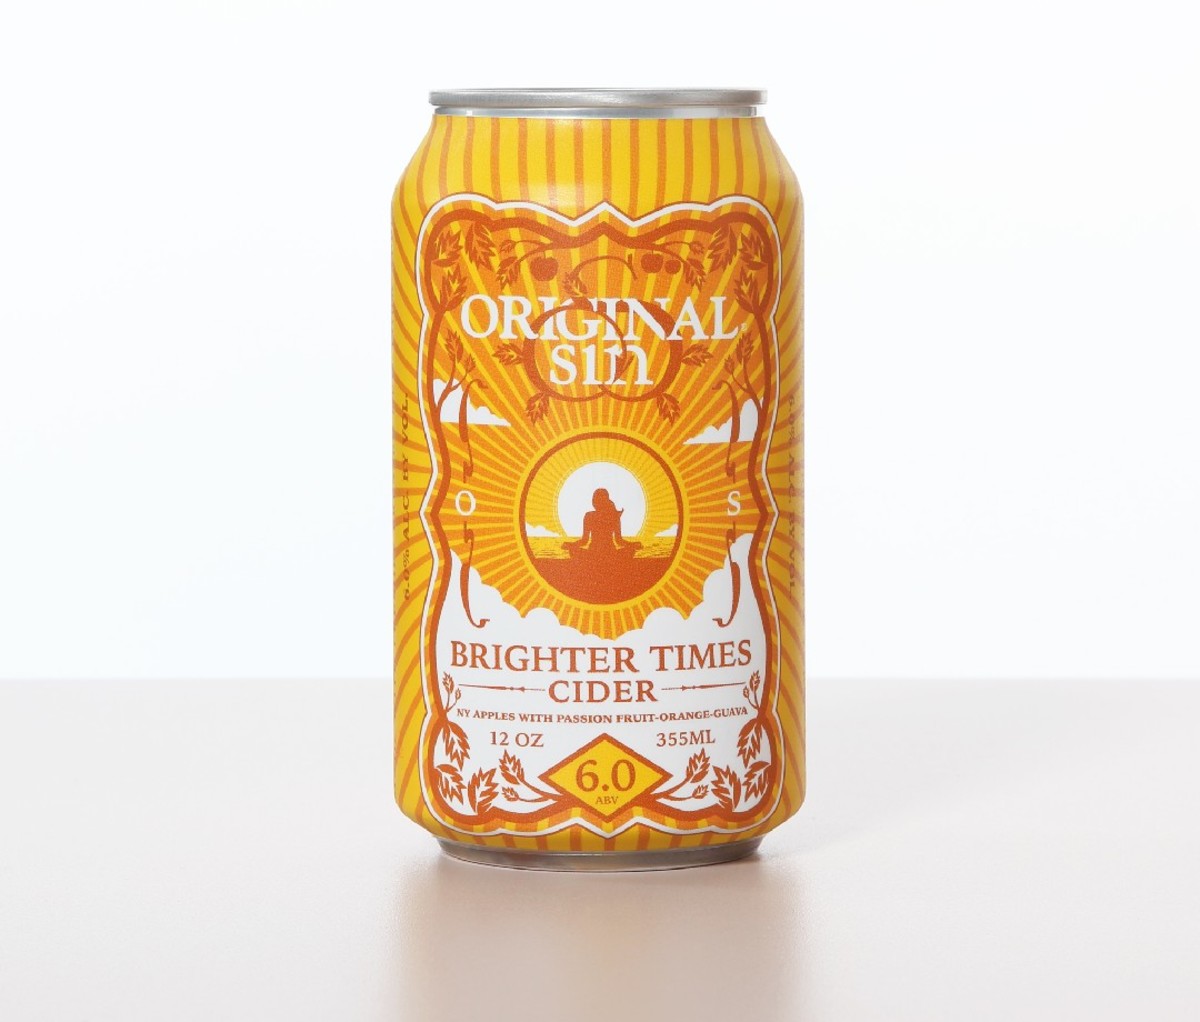 Can of Original Sin Brighter Times cider